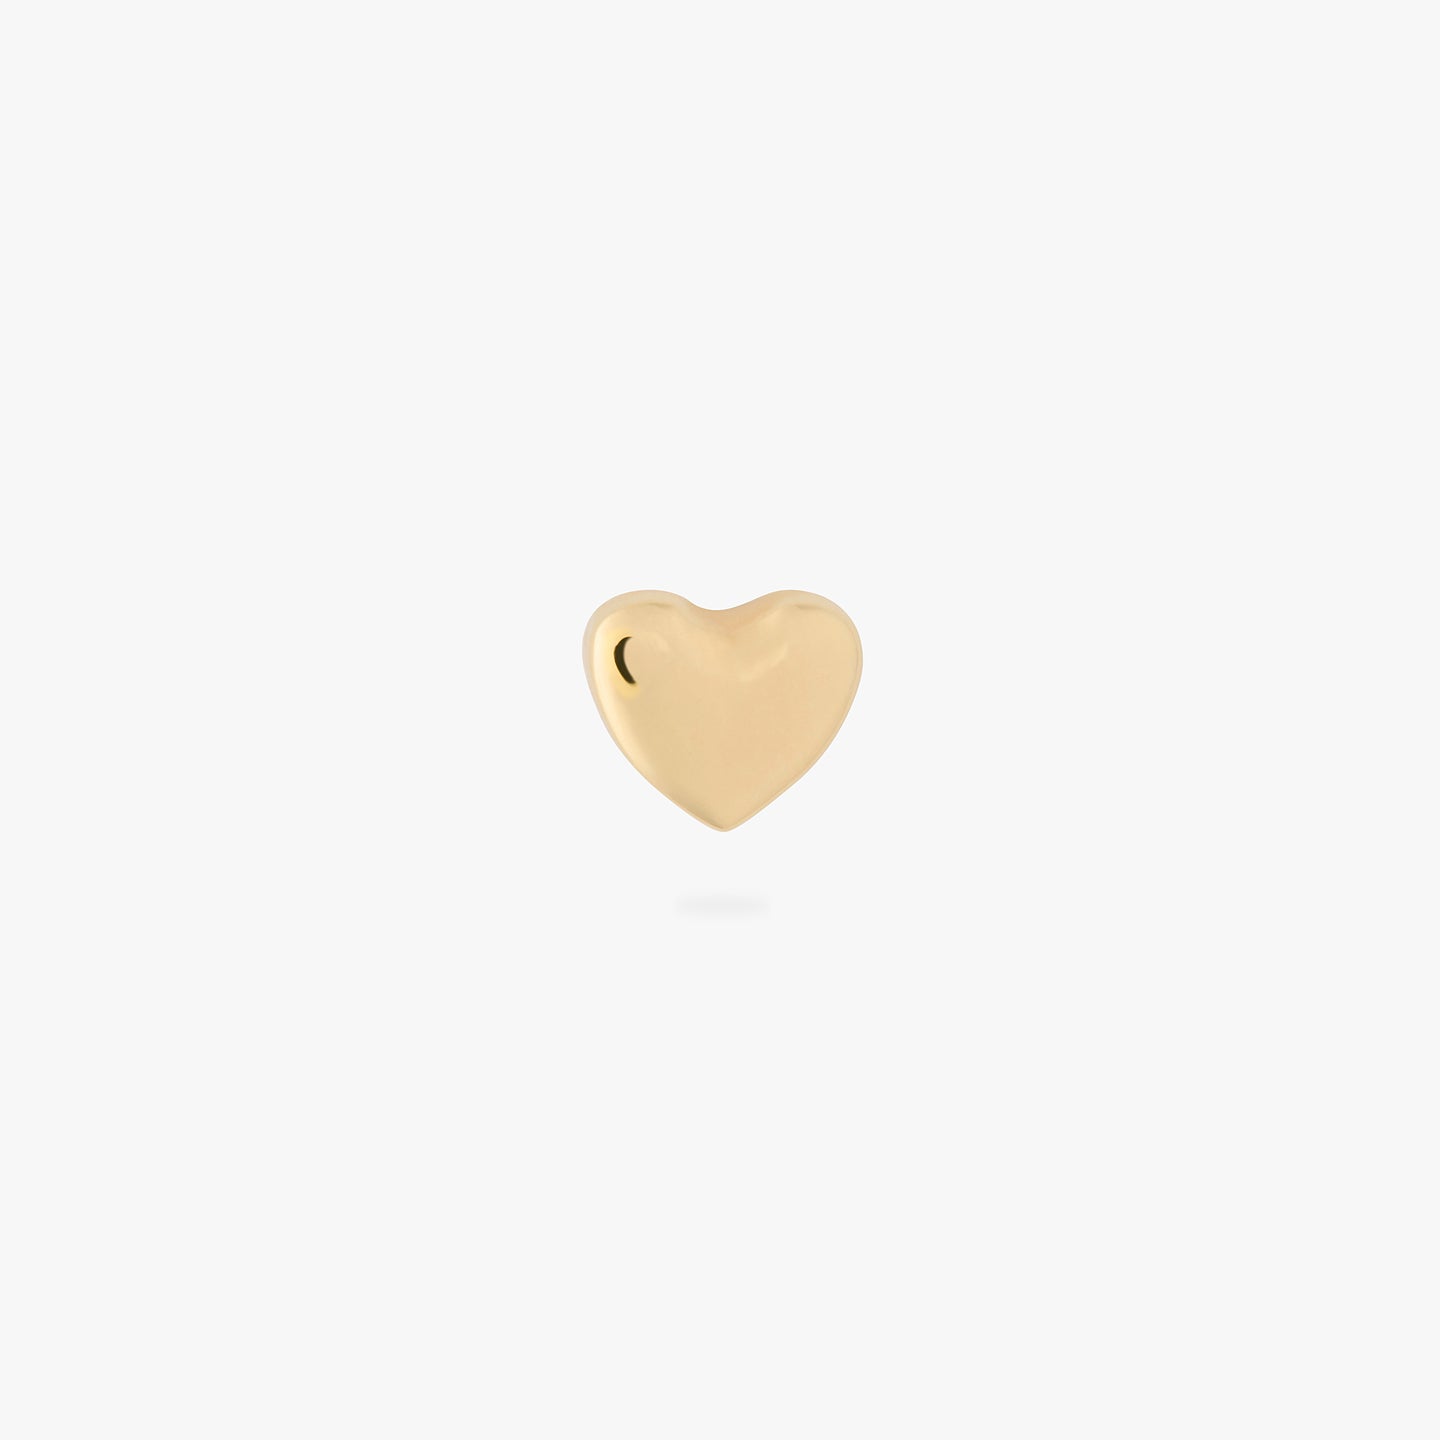 An image of a gold heart shaped flatback post that is 6mm in length. color:null|6mm length